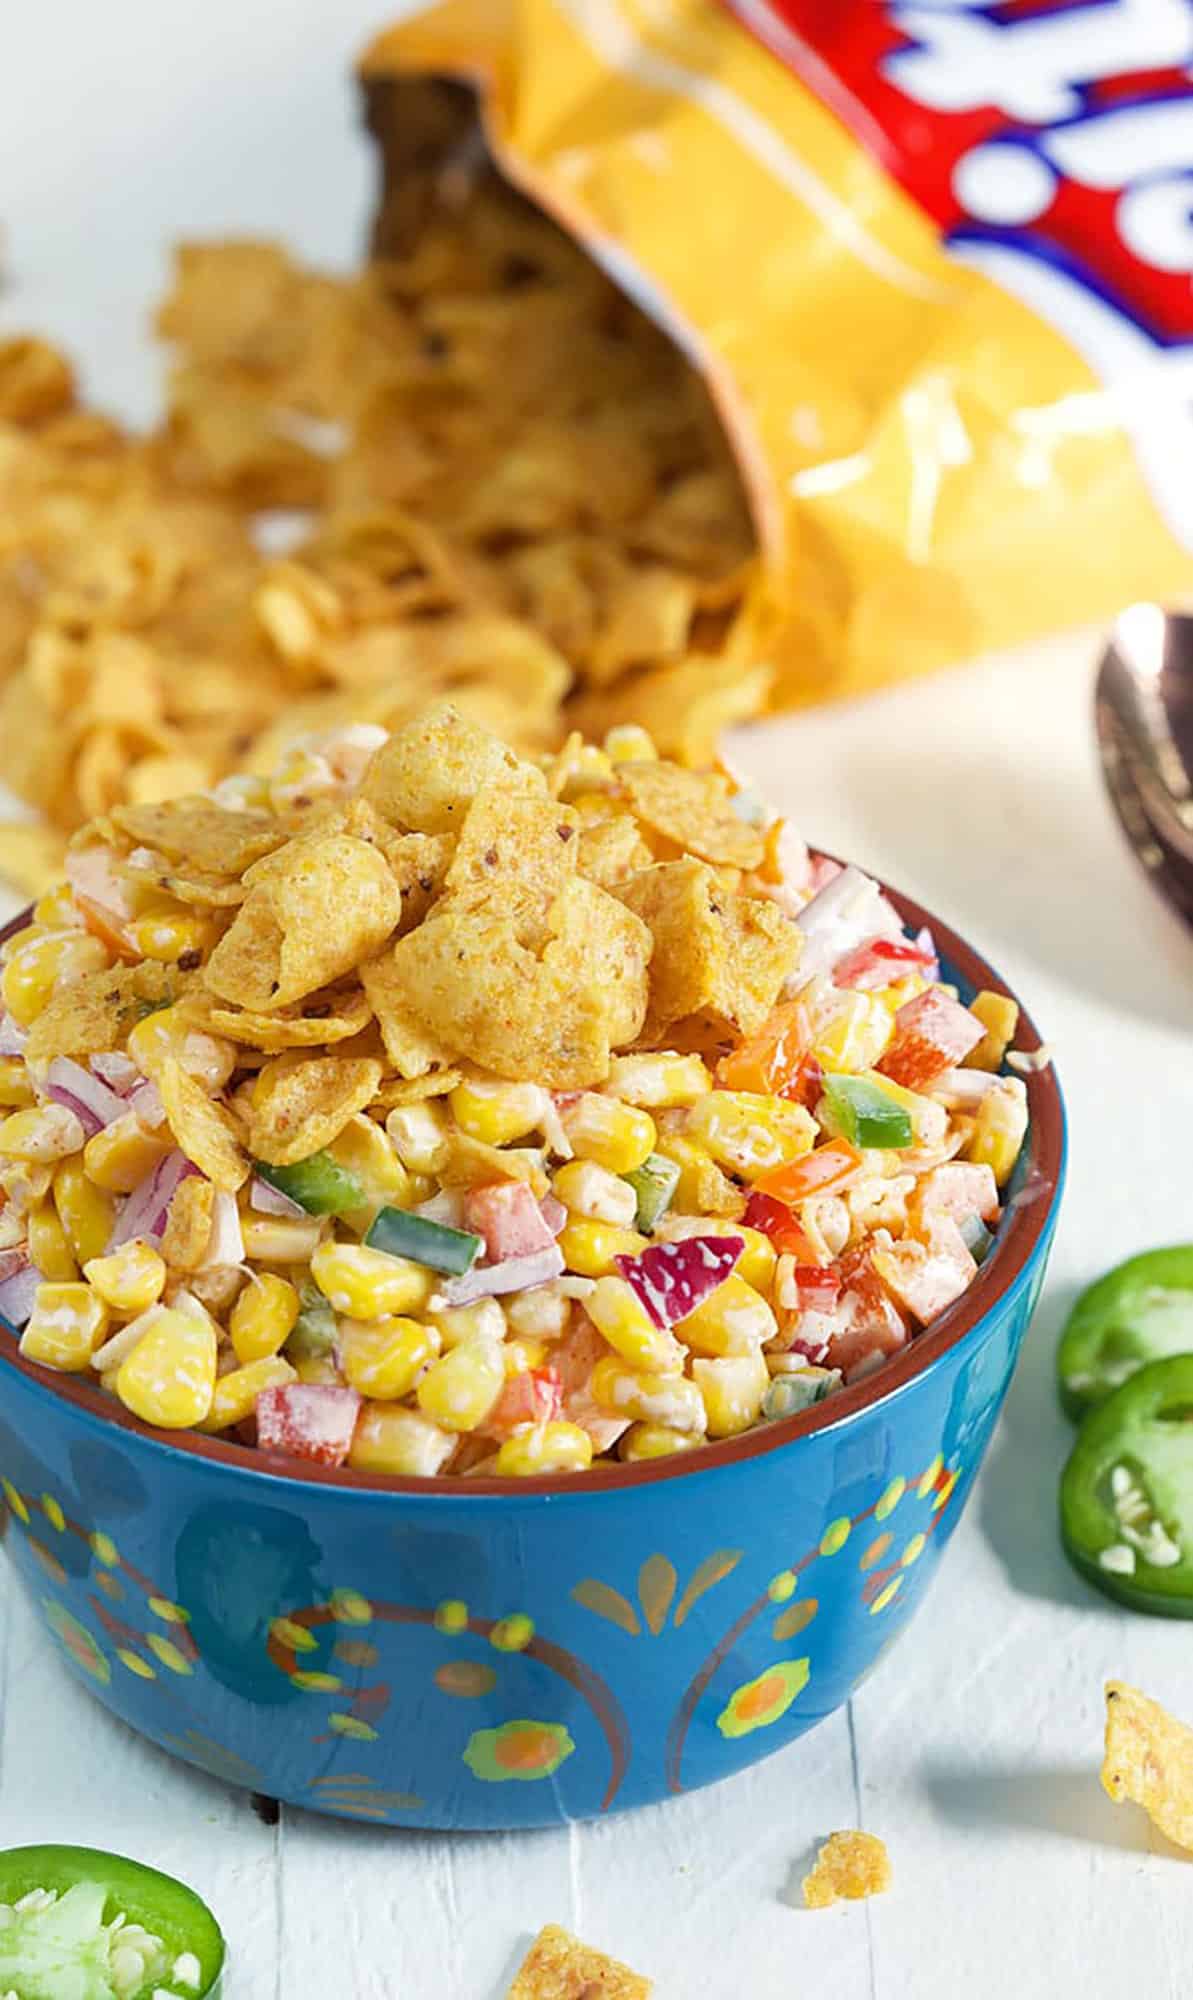 Top down shot of Frito corn salad in a blue bowl.